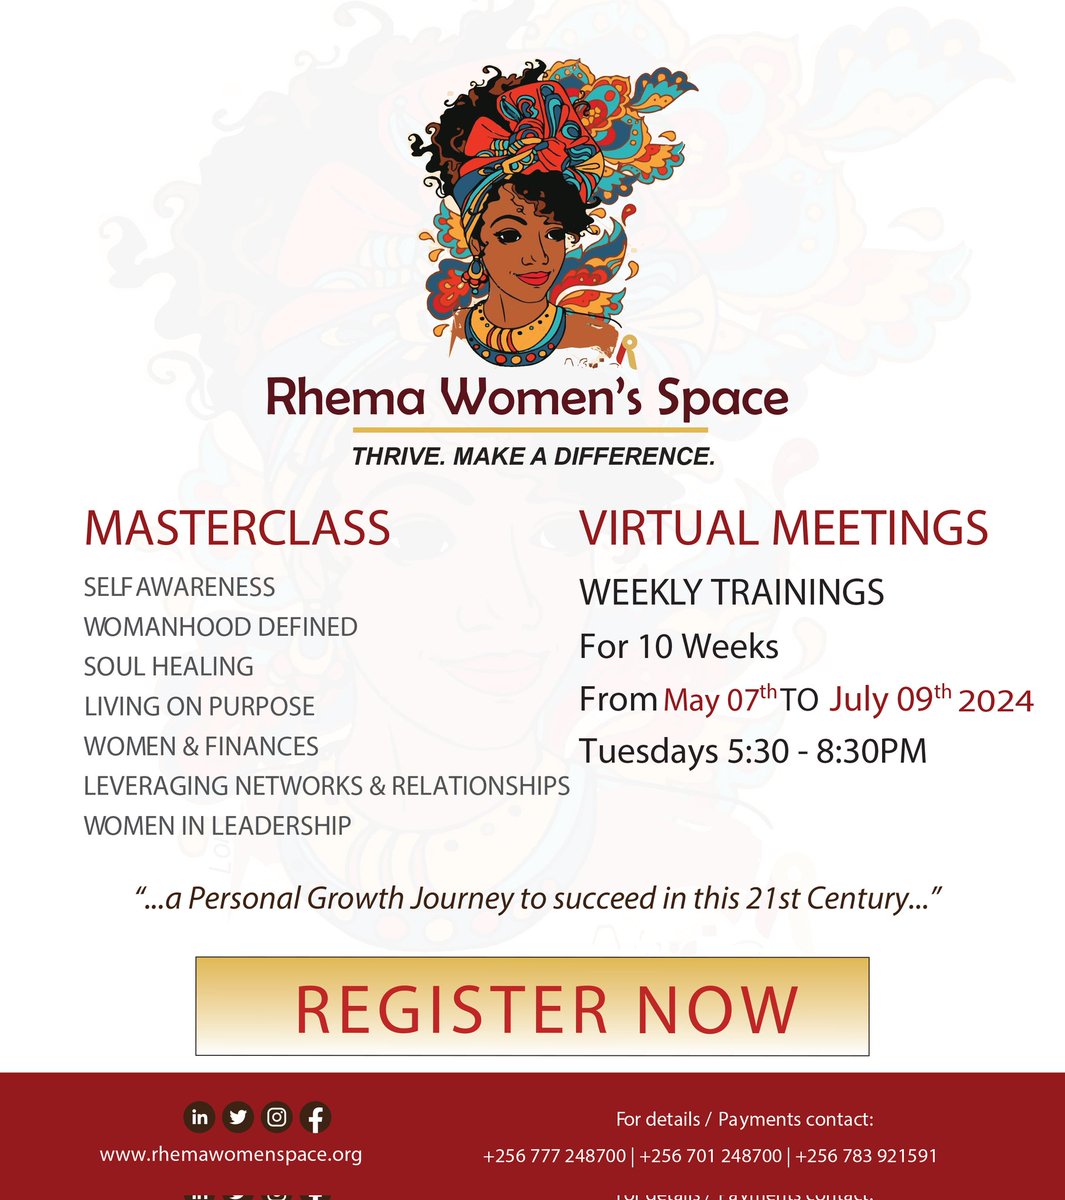 Rhema Women's Space invites you to sign up for the May 2024 Intake of the Thriving Woman MasterClass. Register now. Contact or WhatsApp the numbers in the poster for details on fee and more.